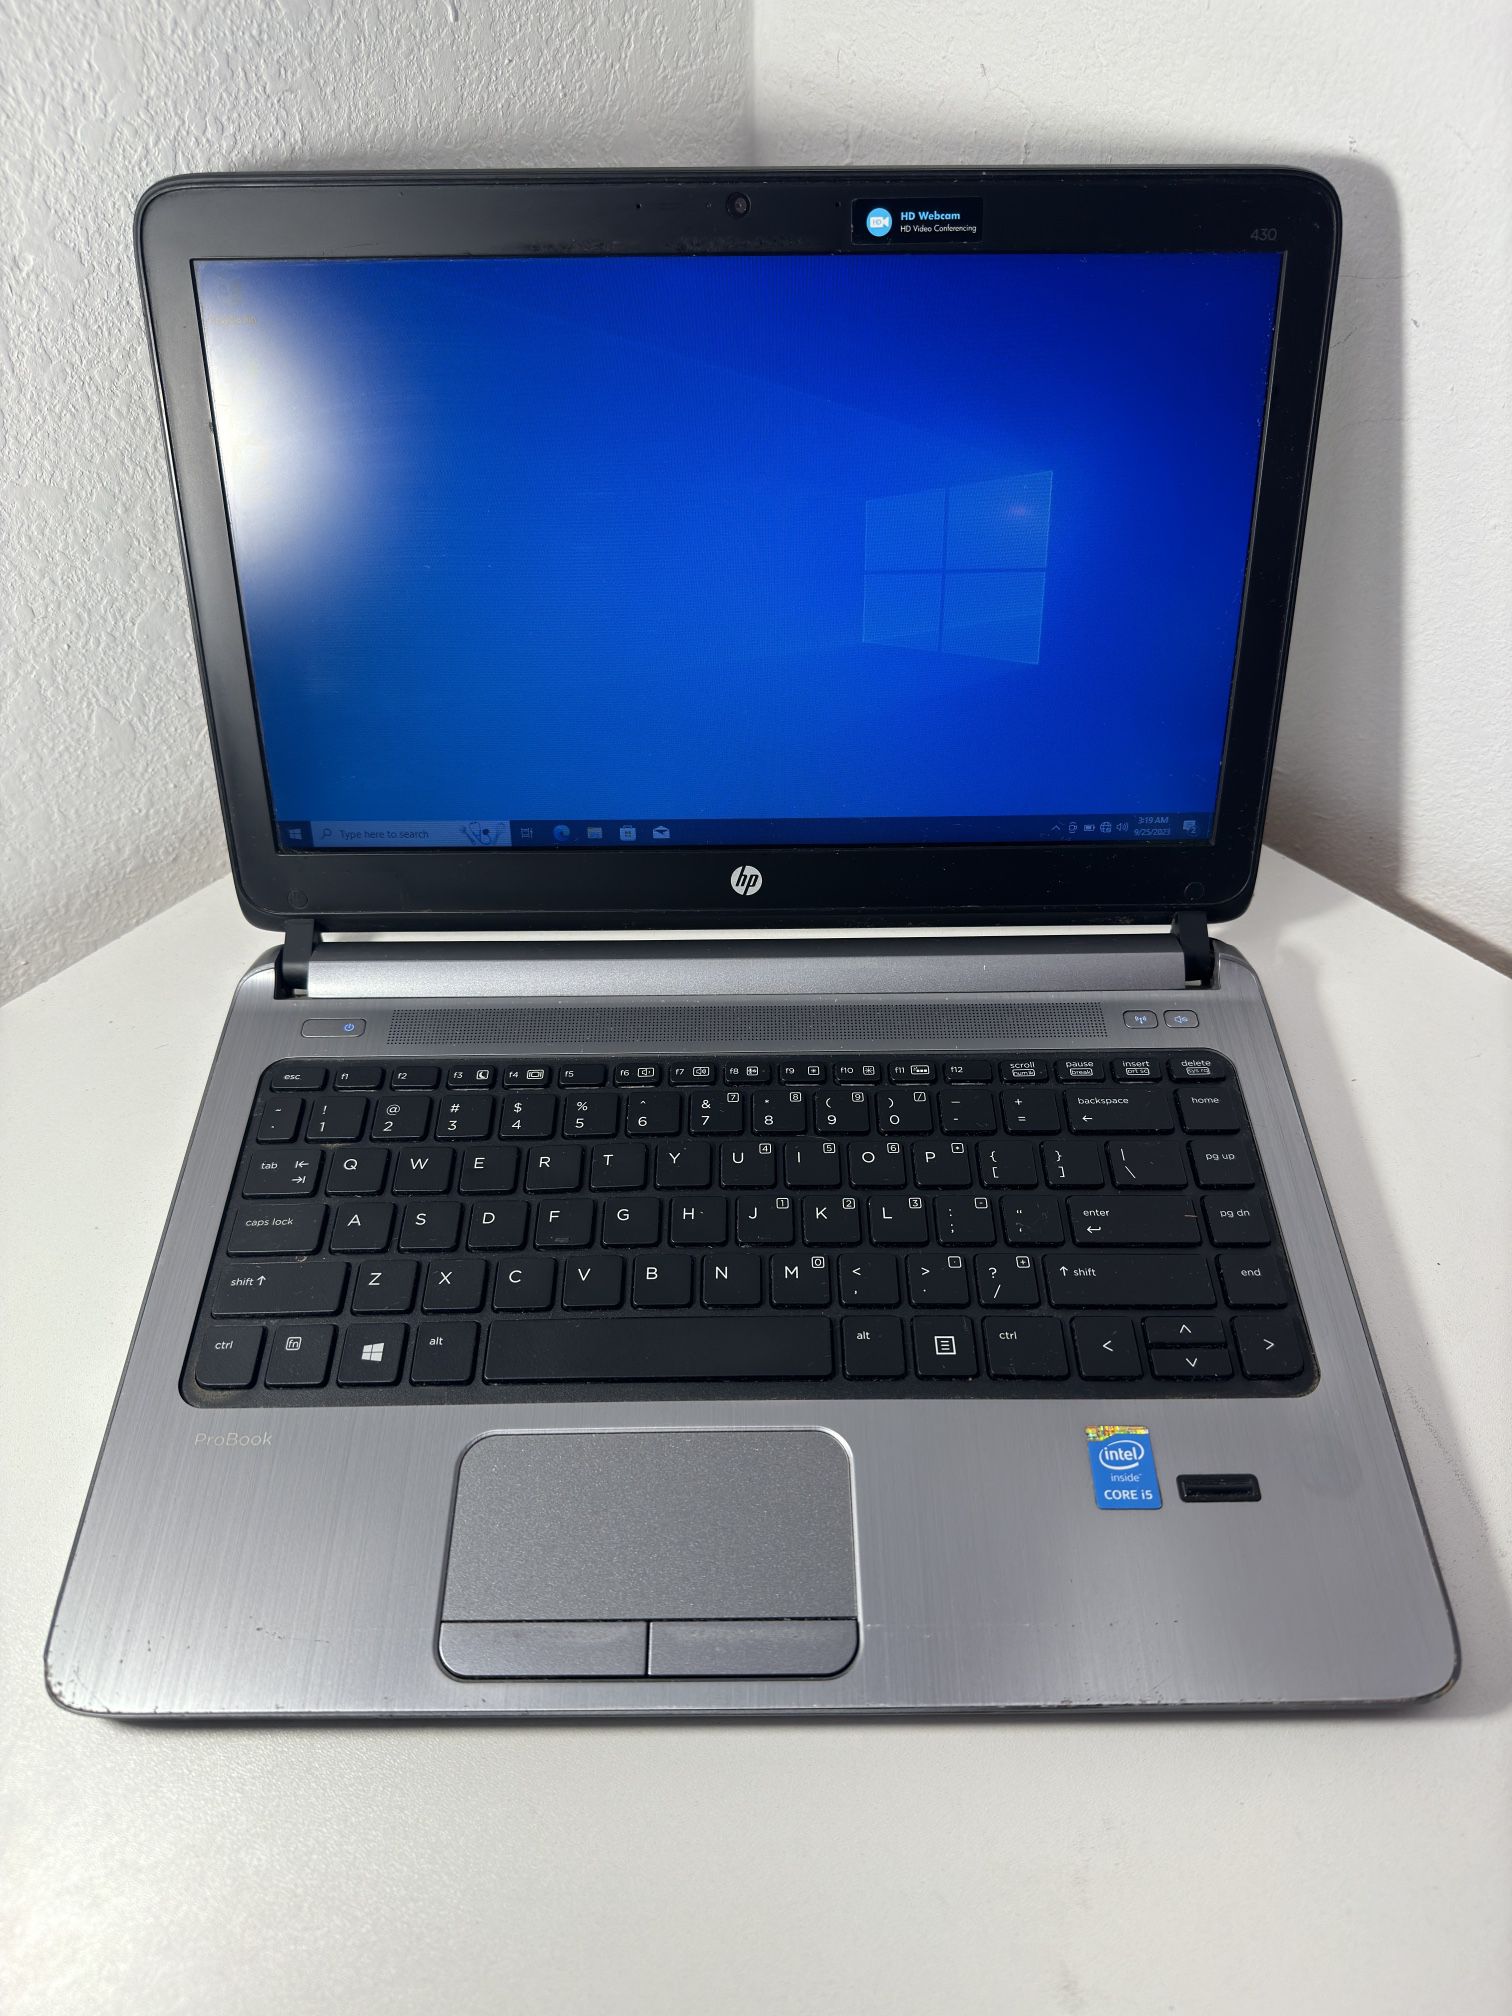 HP Probook 430 G2 I5 8GB 240GB SSD with Charger